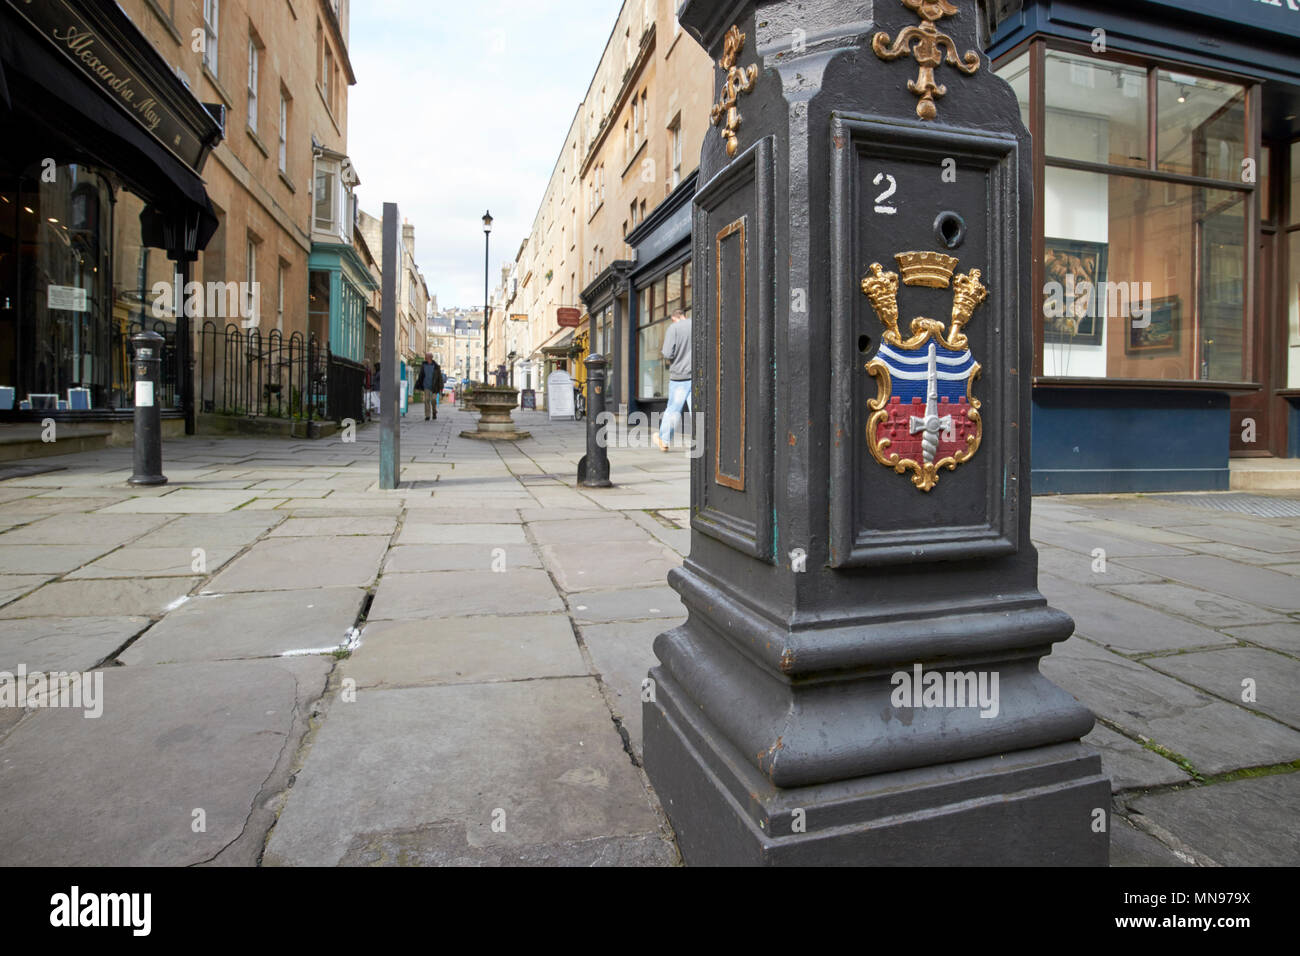 city of bath coat of arms on a lamp post in Bath England UK Stock Photo